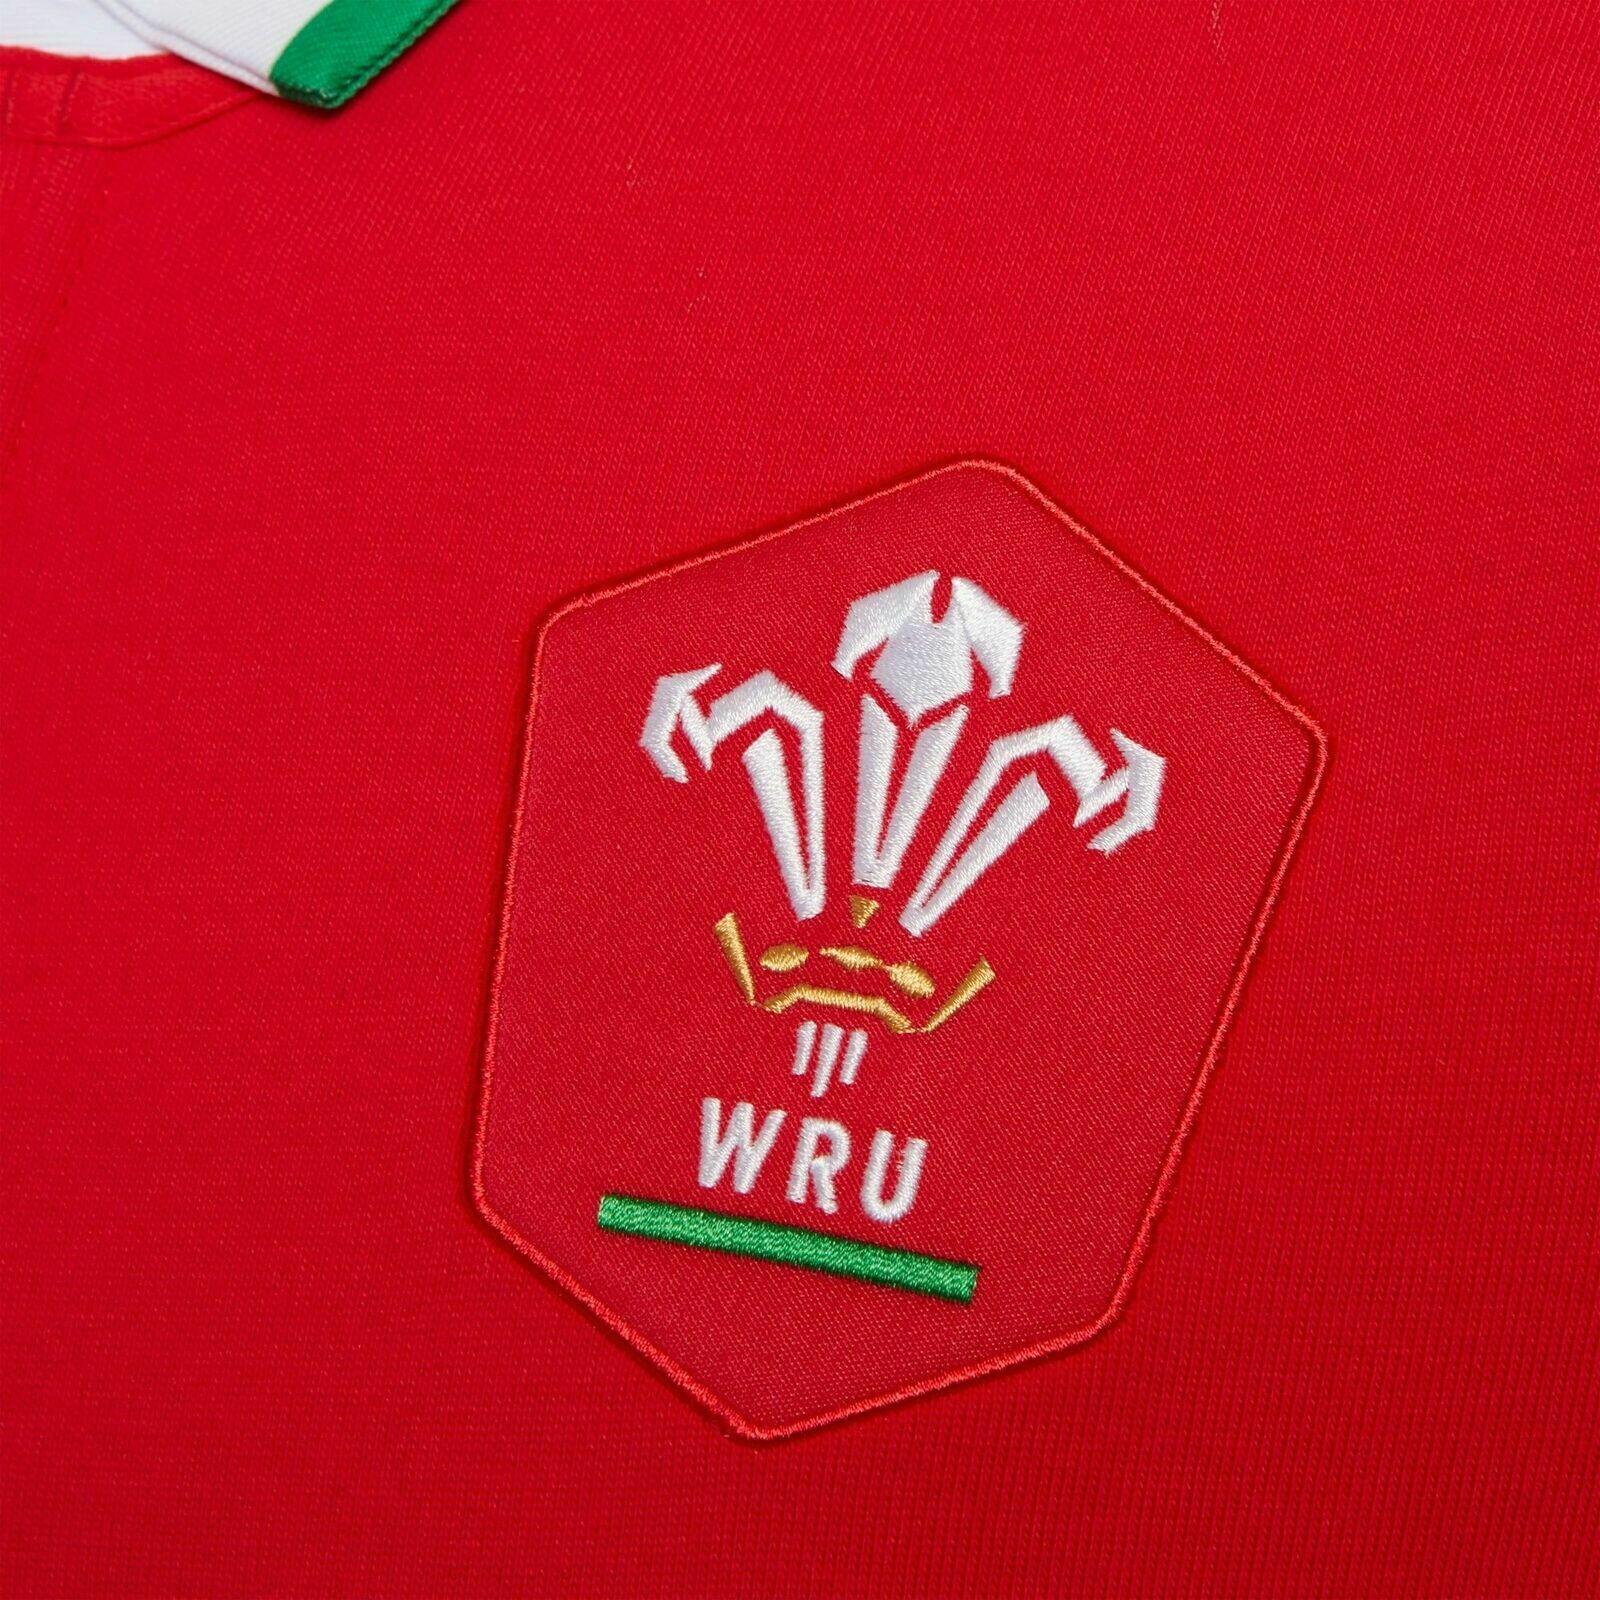 Macron Wales WRU Mens Home Cotton Rugby Shirt 58125445 Red 3/4